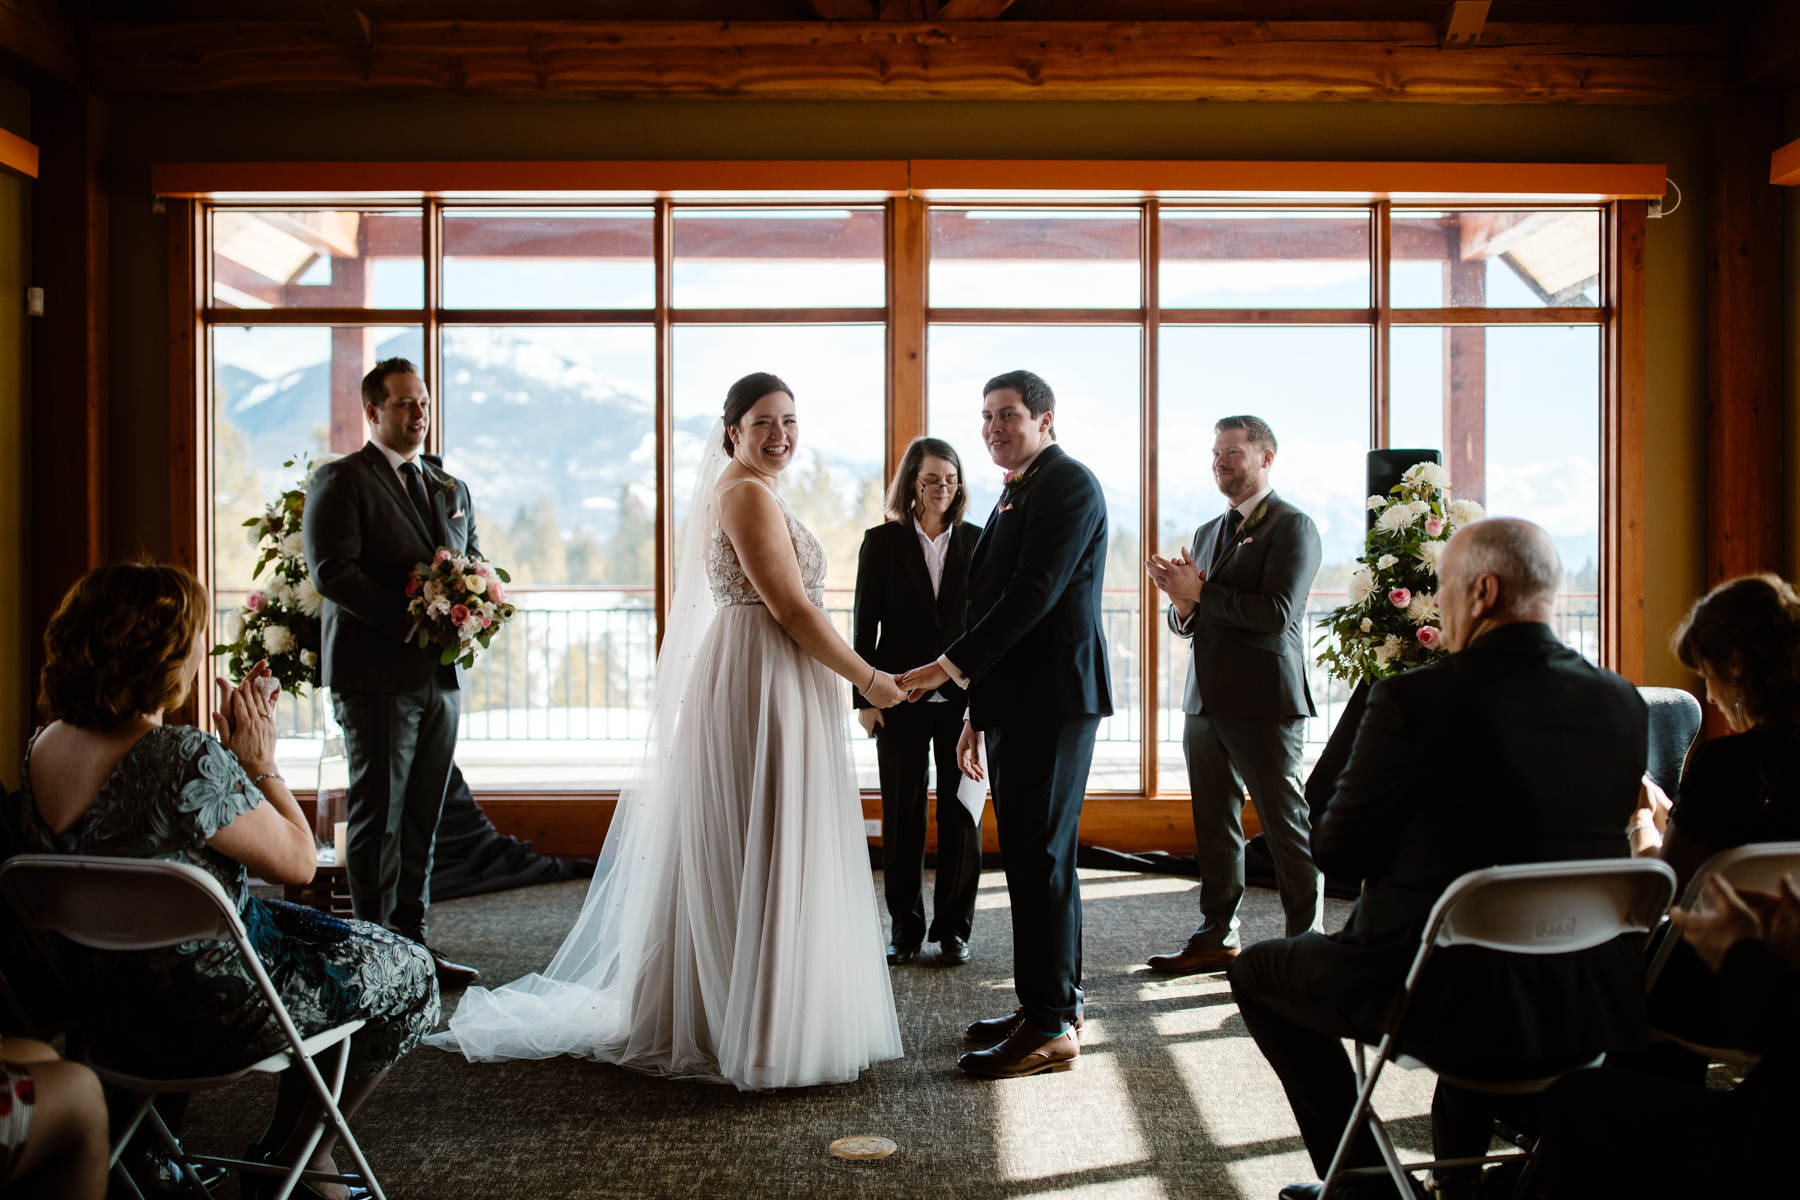 Invermere Wedding Photographers at Eagle Ranch and Panorama Ski Resort - Image 25